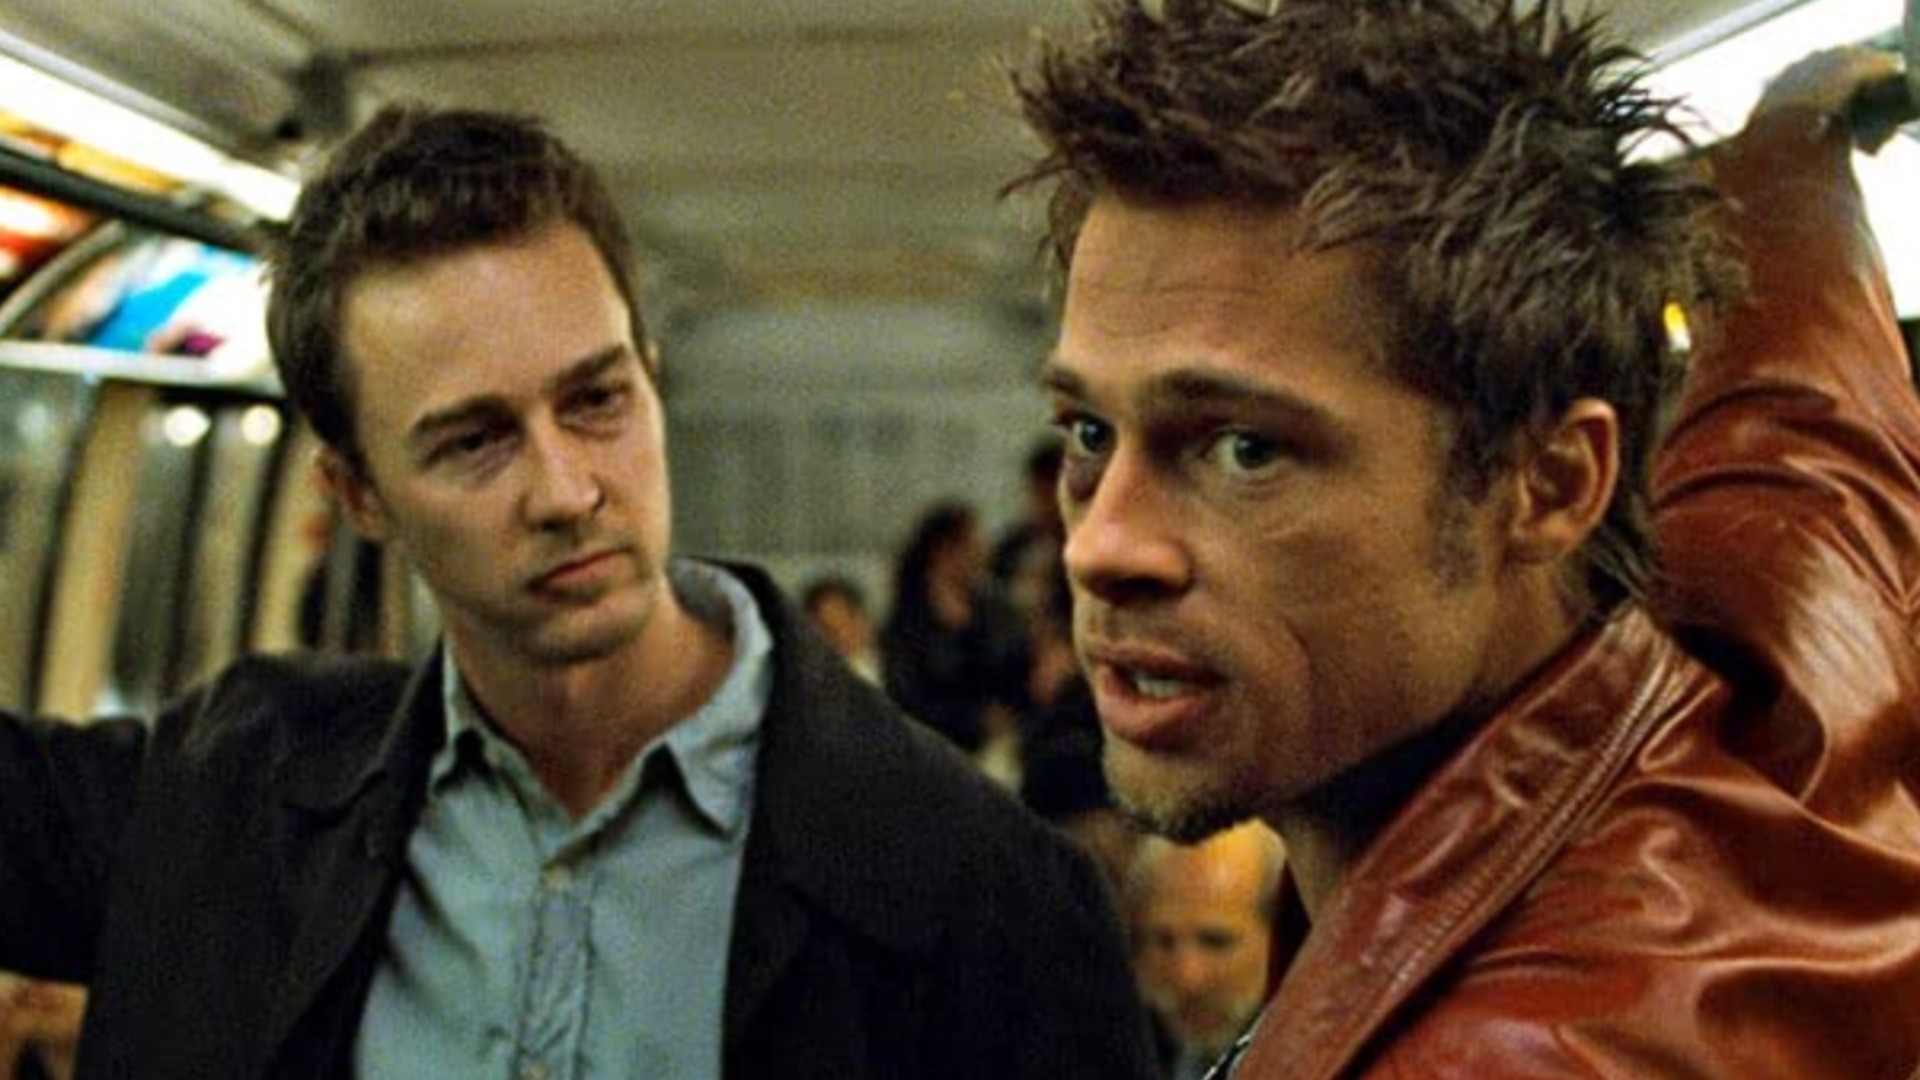 Fight Club creator explains why he wasn't a big fan of the David